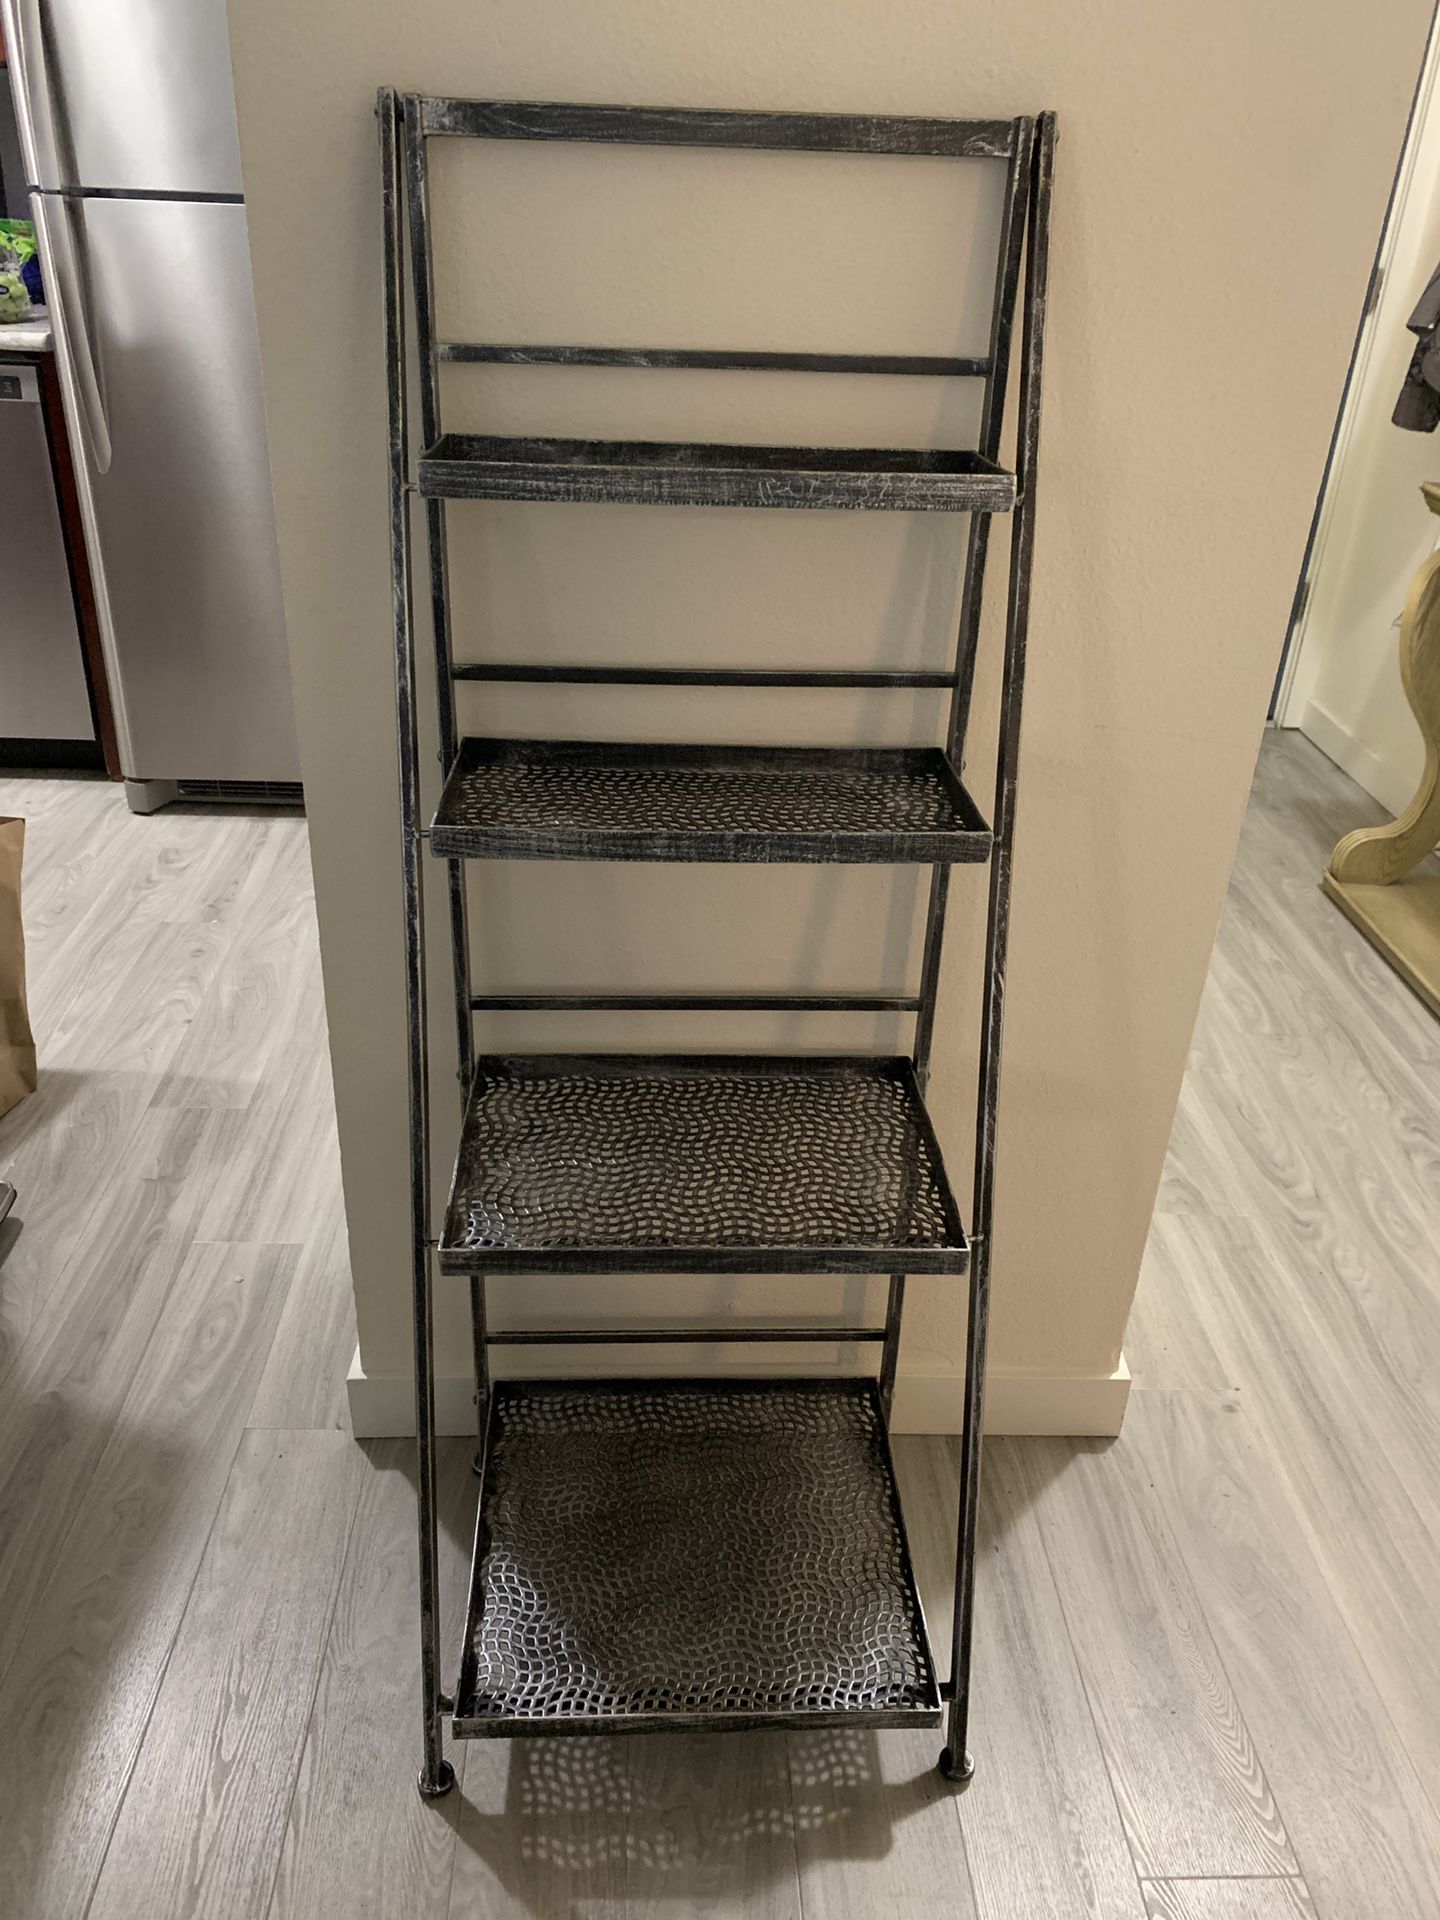 ON SALE-MUST GO IMMEDIATELY Metal stands with shelves